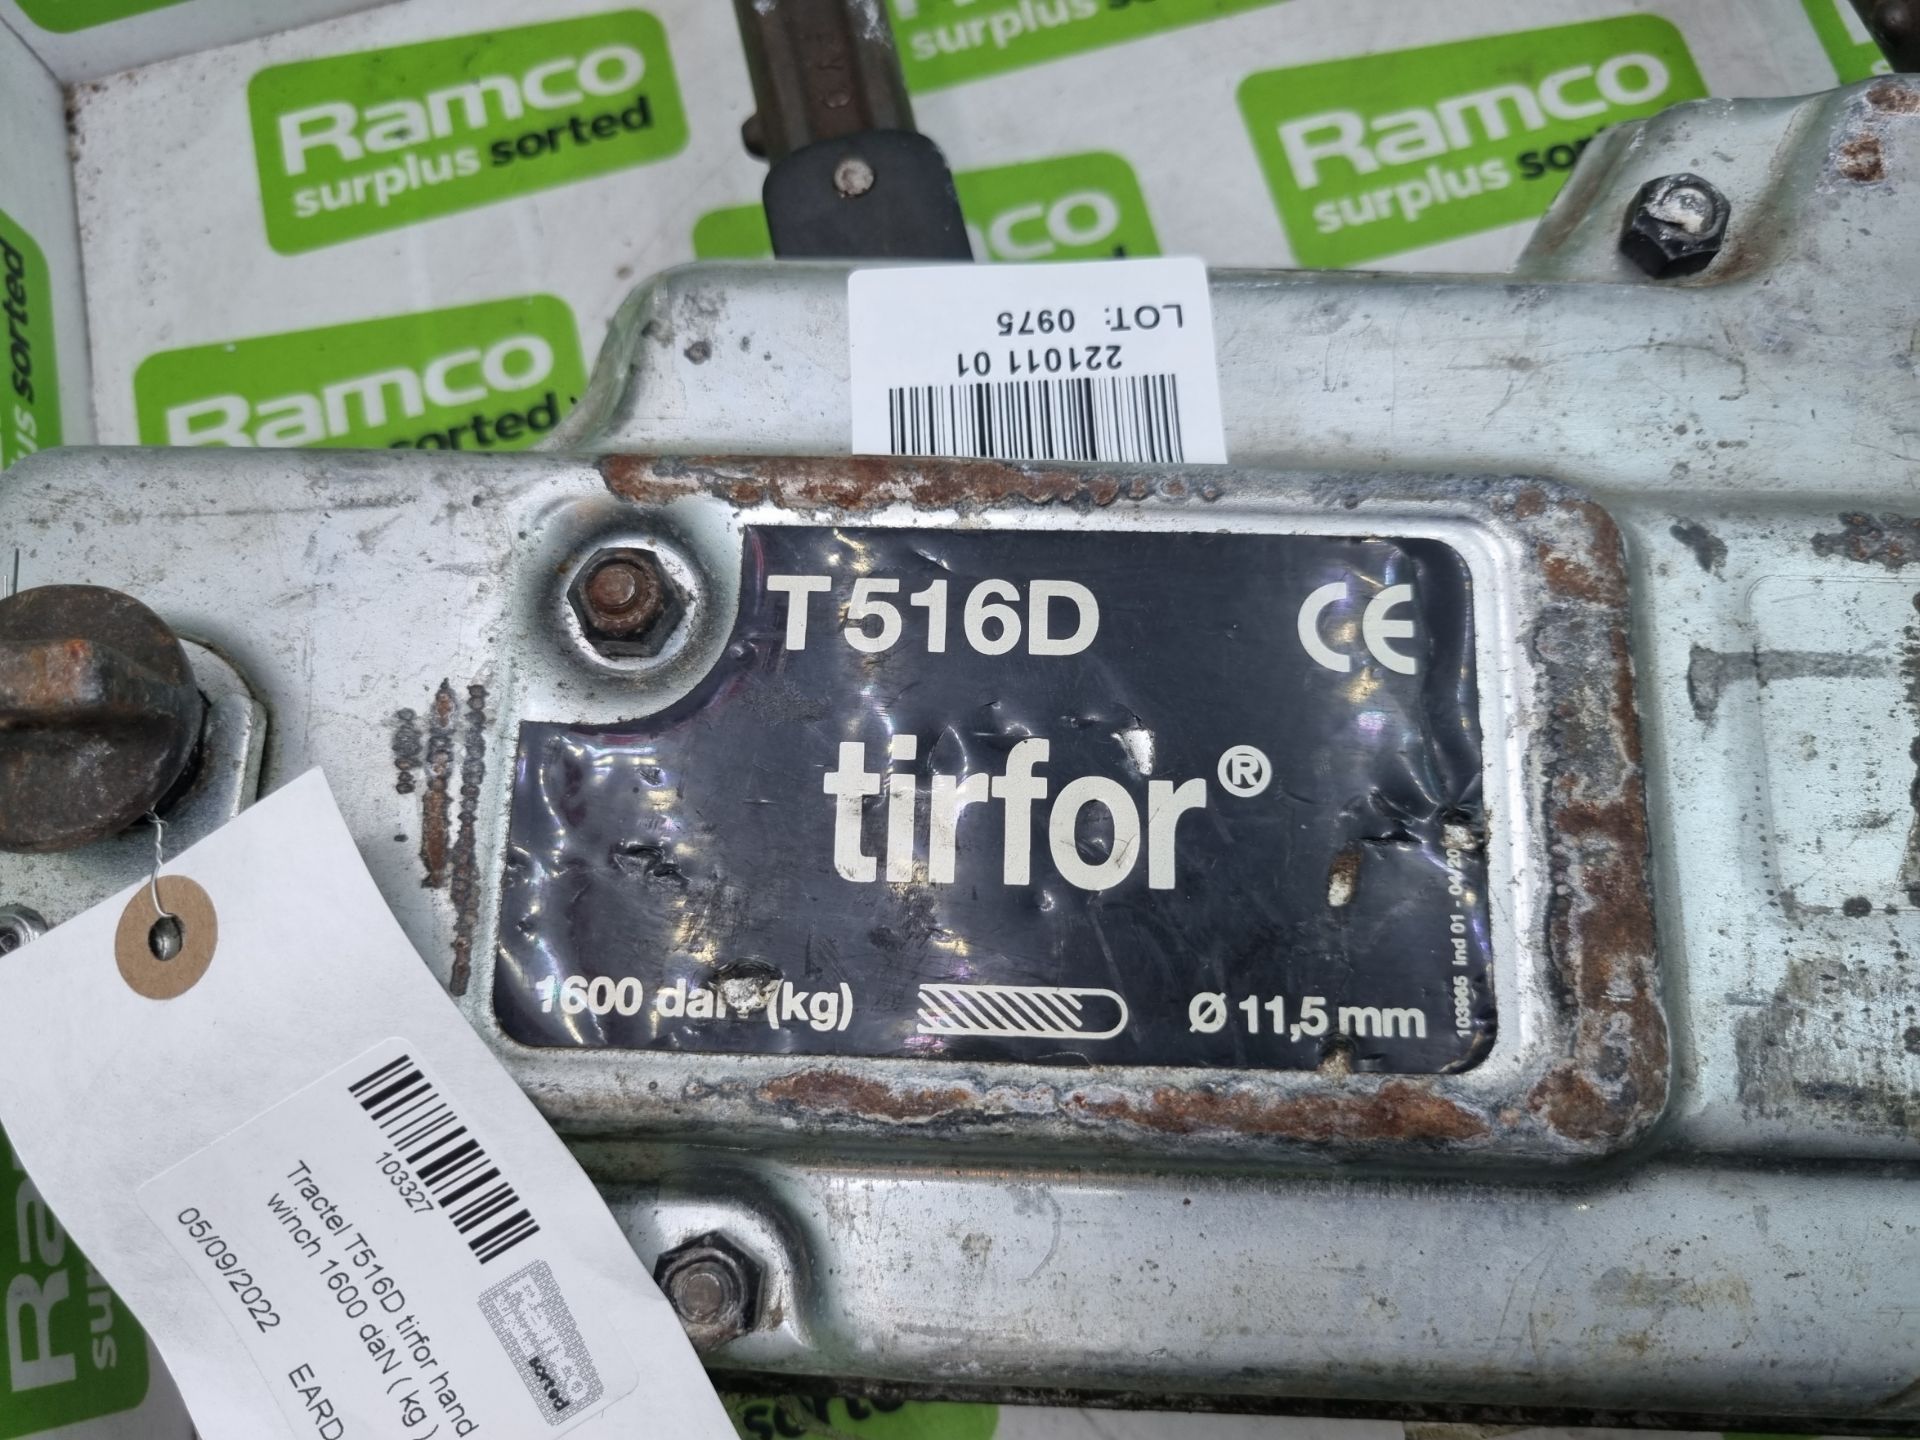 Tractel T516D tirfor hand winch 1600 daN ( kg ) - Image 2 of 4